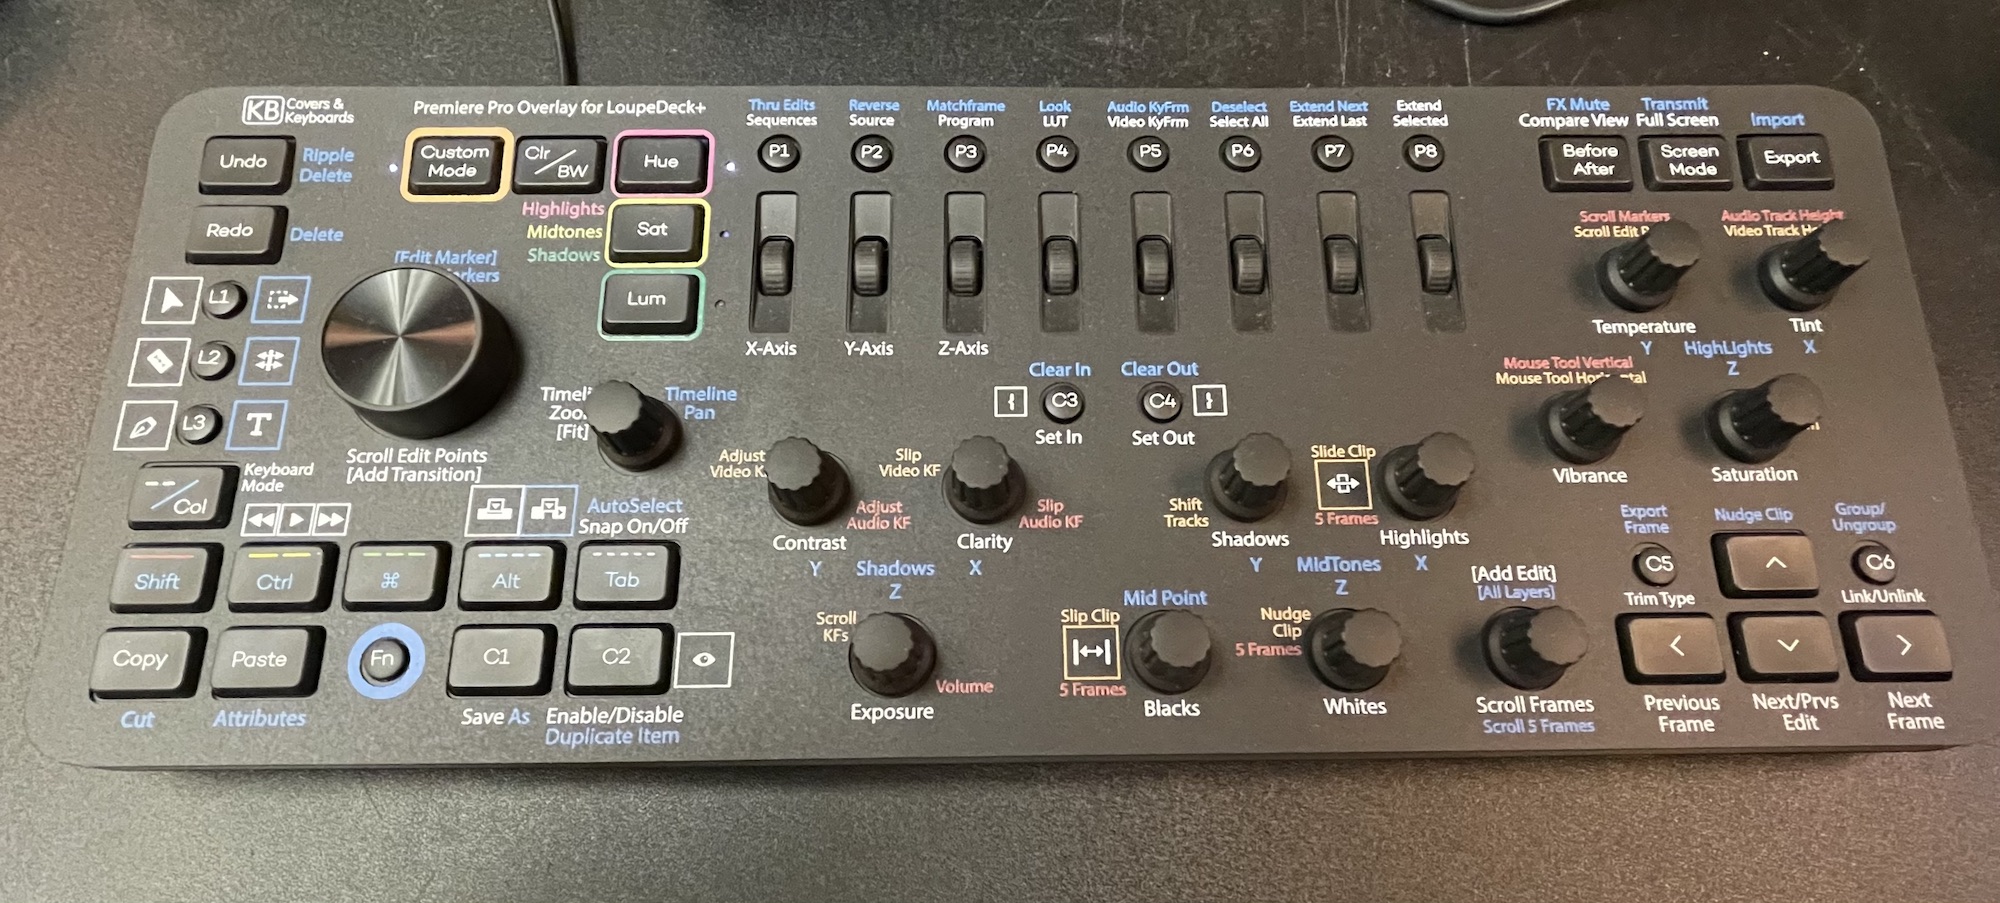 Custom video editing overlays for the Loupedeck+ control surface 3